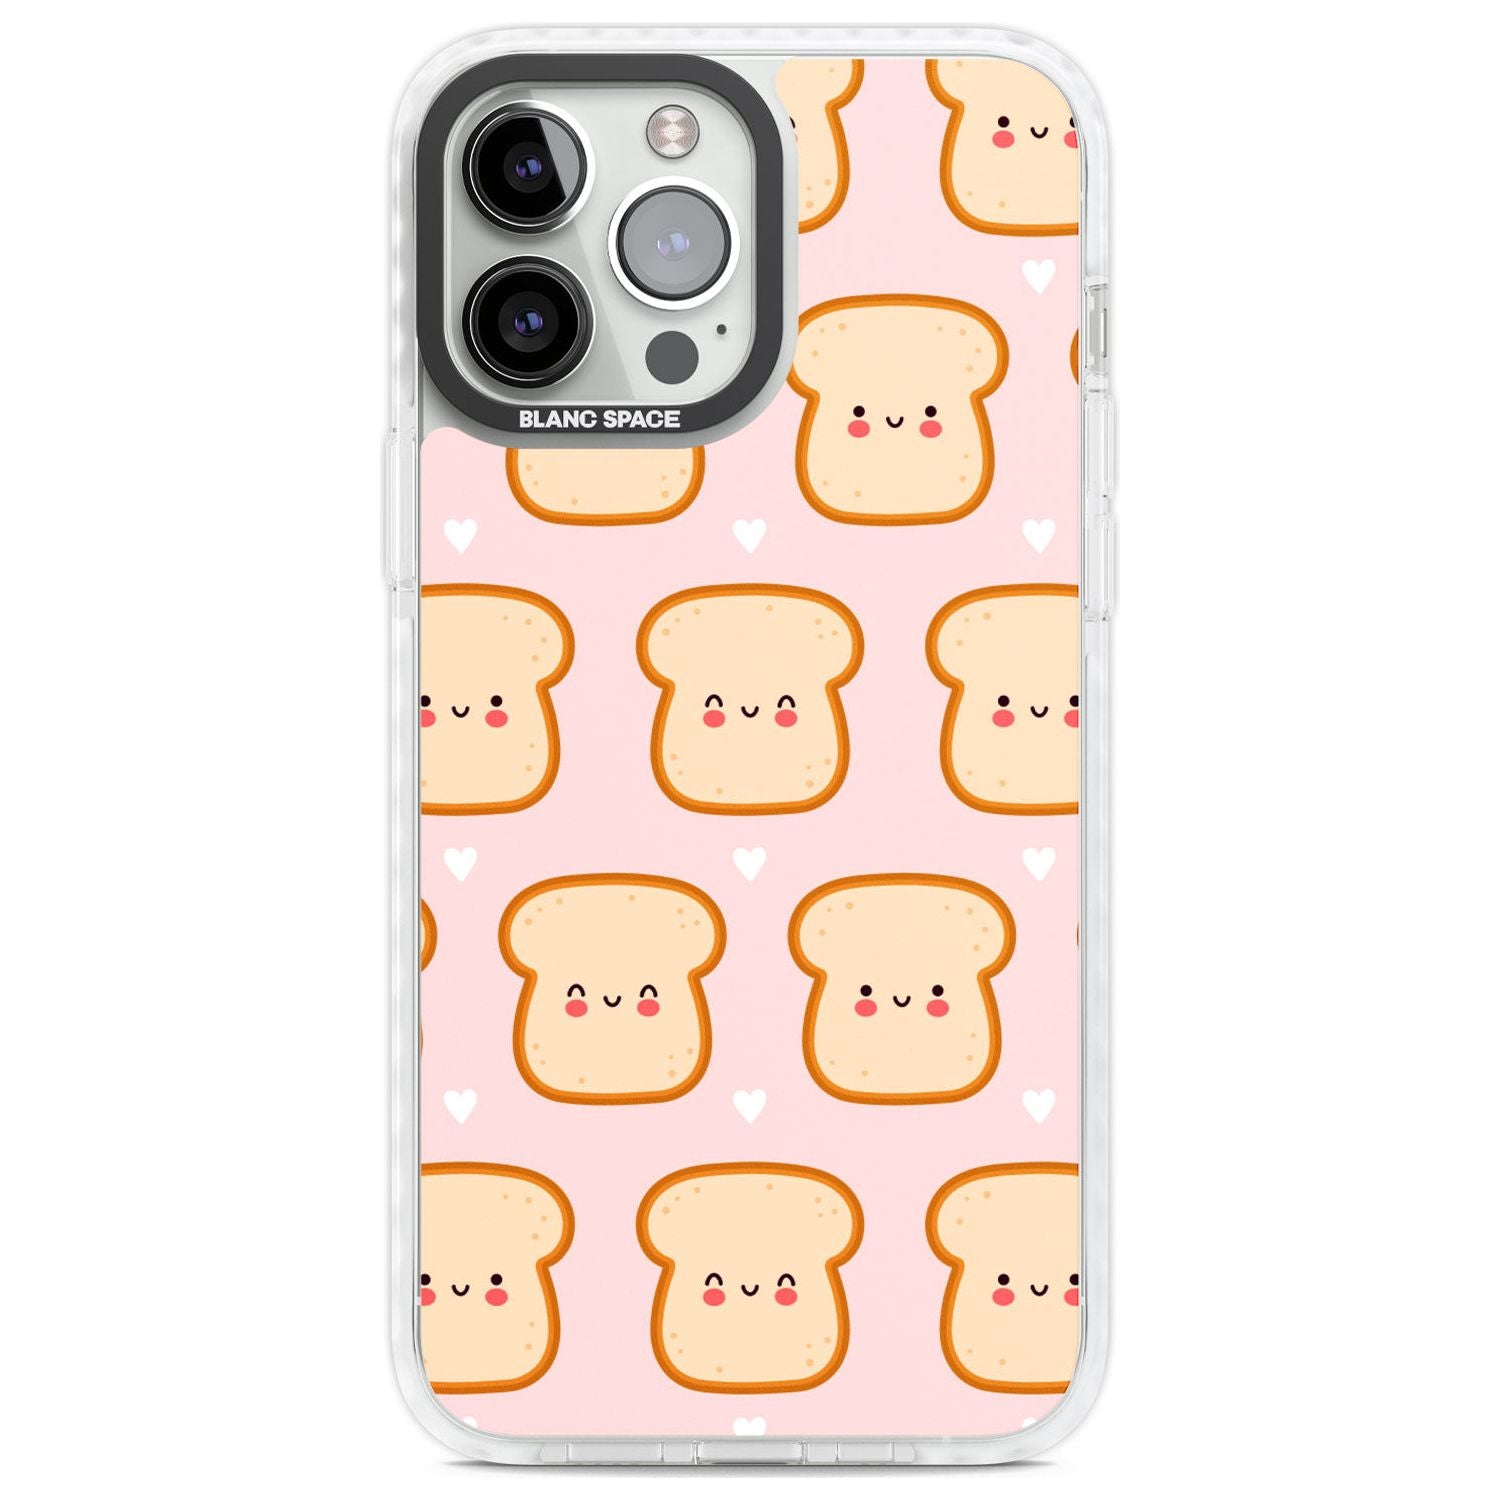 Bread Faces Kawaii Pattern Phone Case iPhone 13 Pro Max / Impact Case,iPhone 14 Pro Max / Impact Case Blanc Space